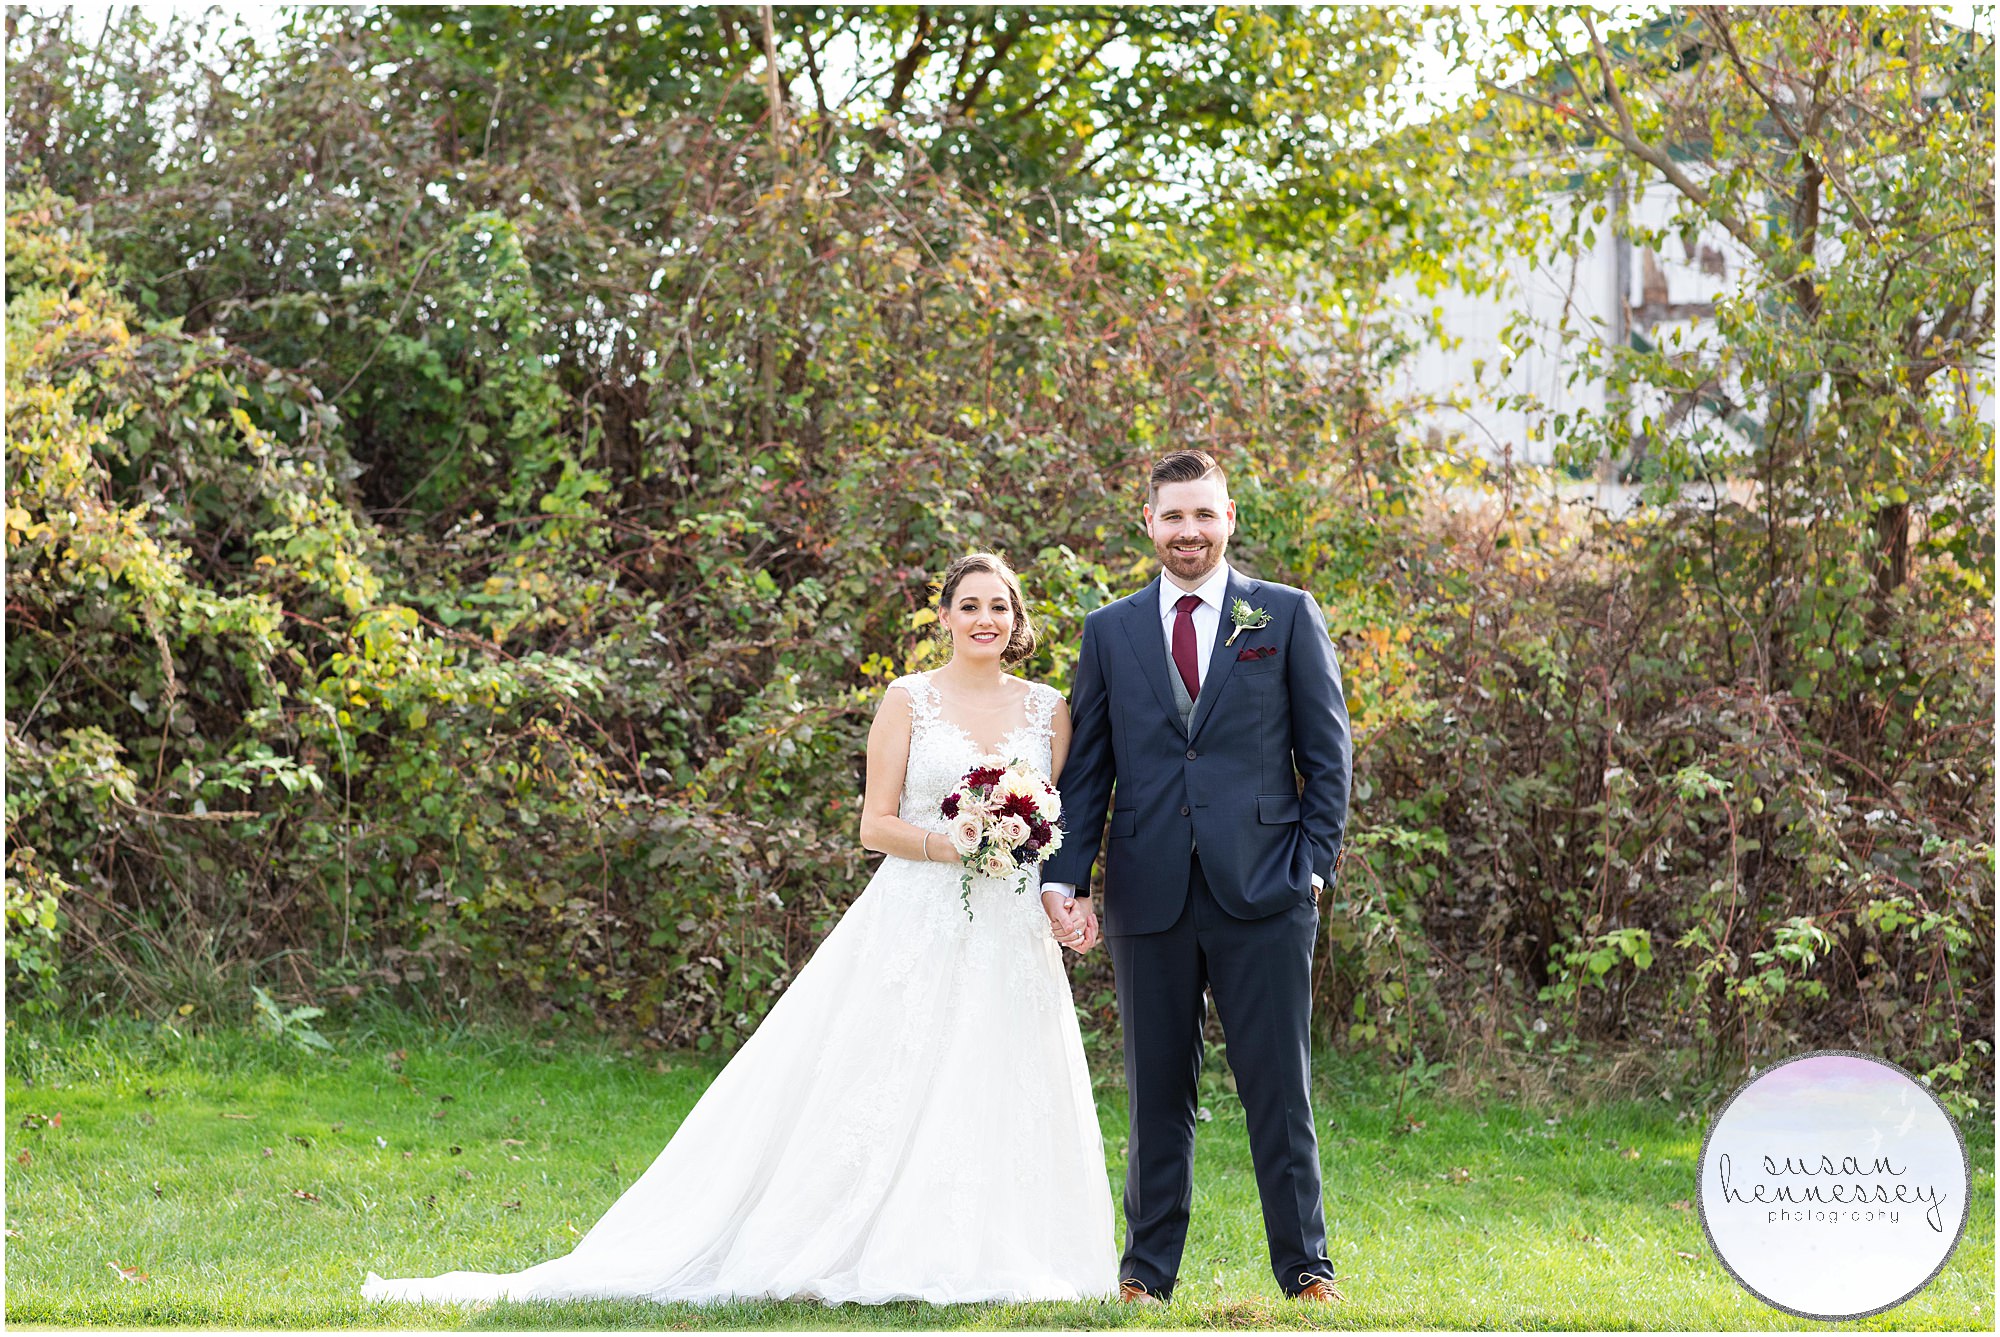 Classic bride and groom portraits at Fall Wedding at Old York Country Club